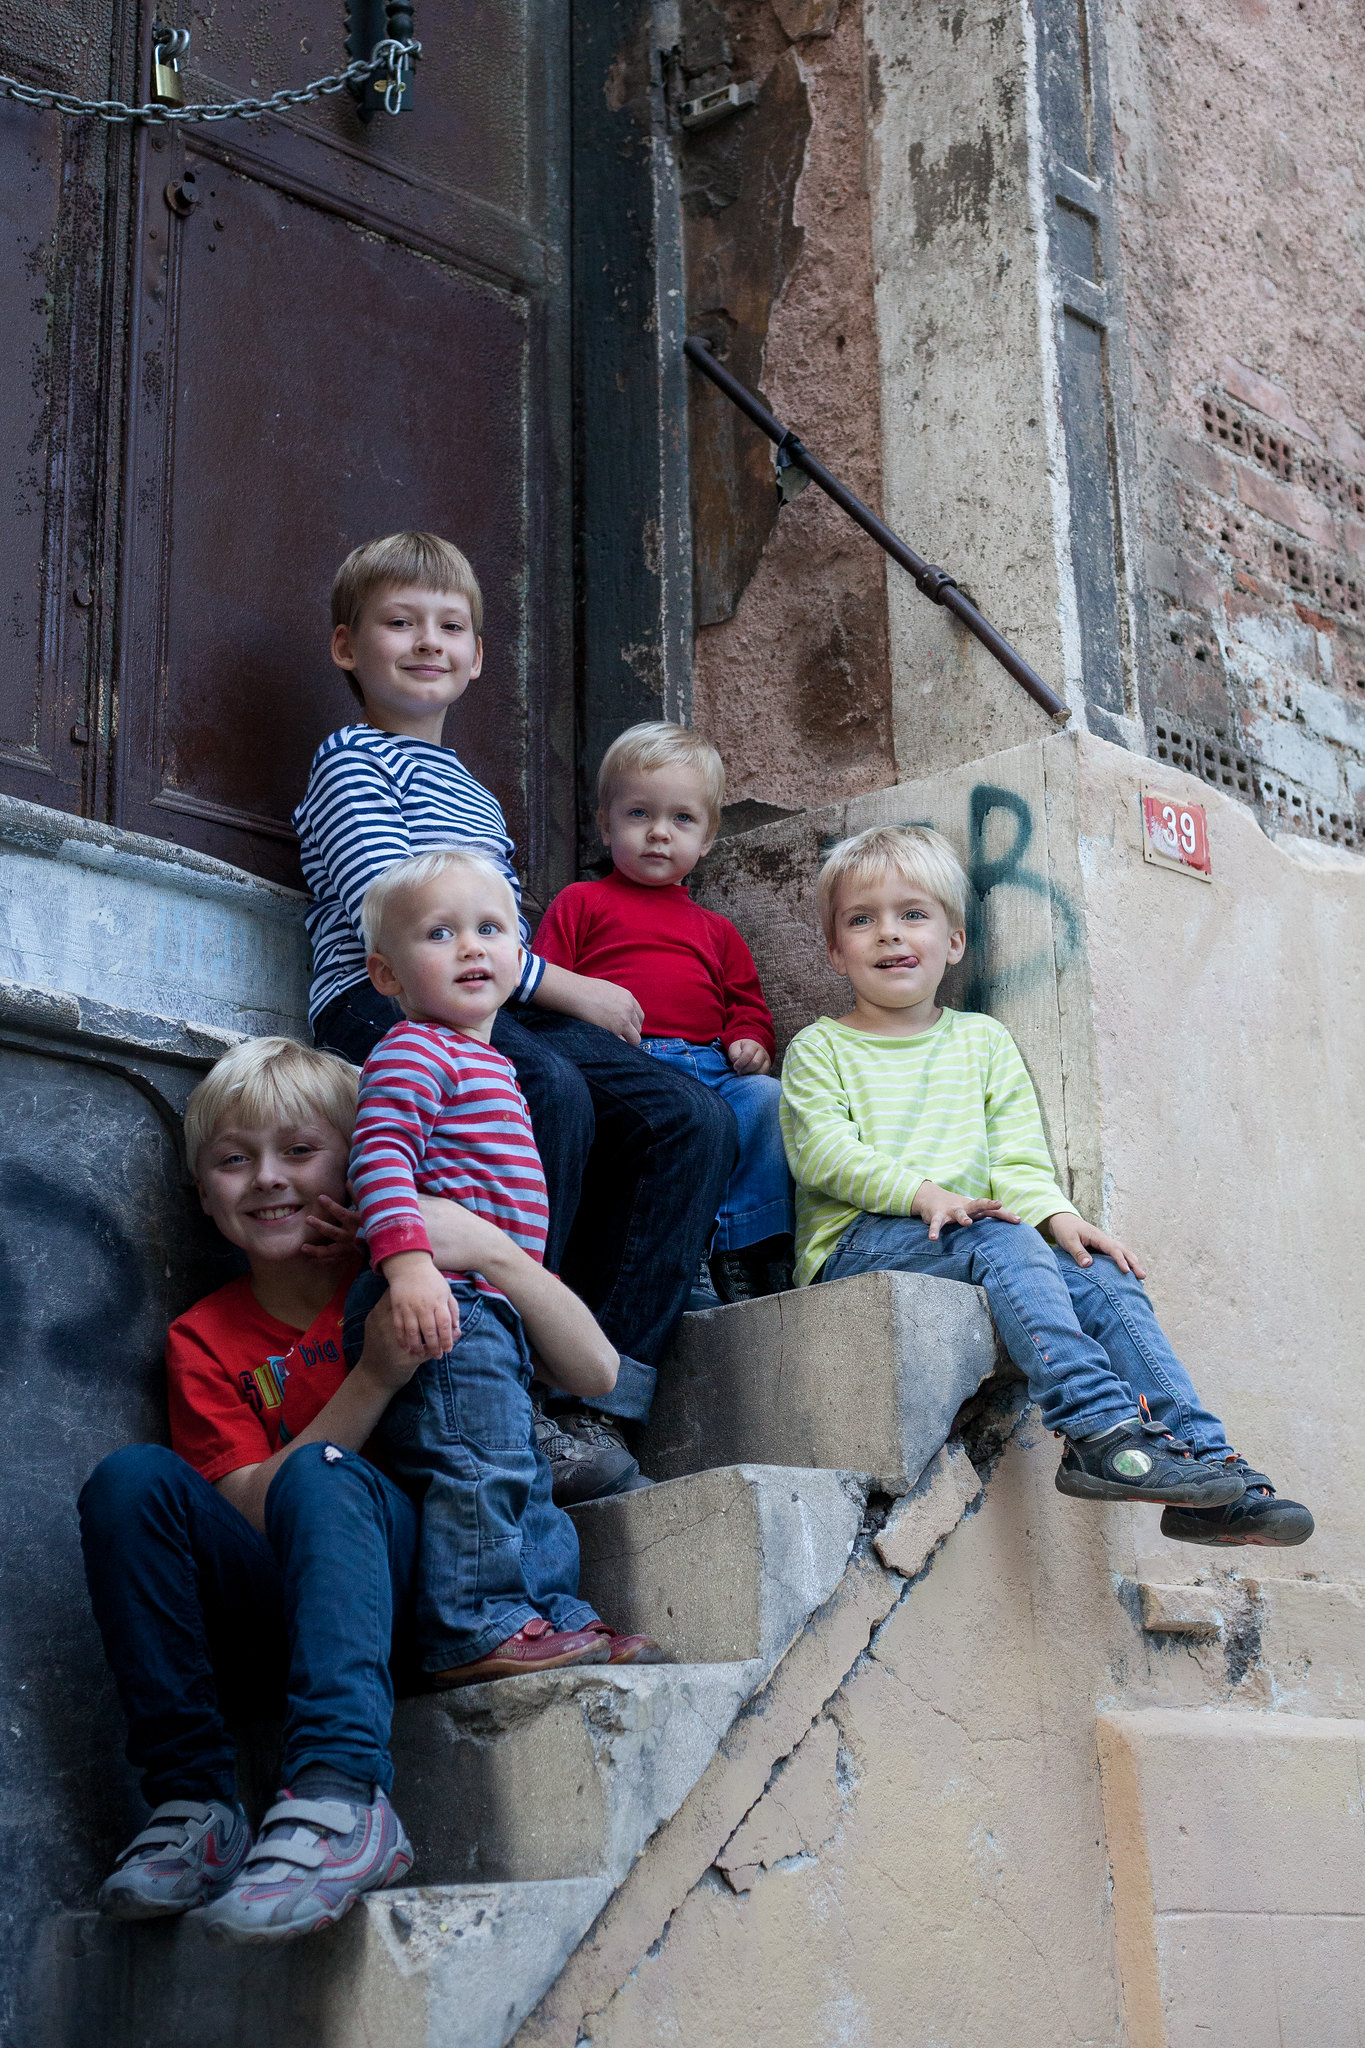 5 of our 8 kiddos.